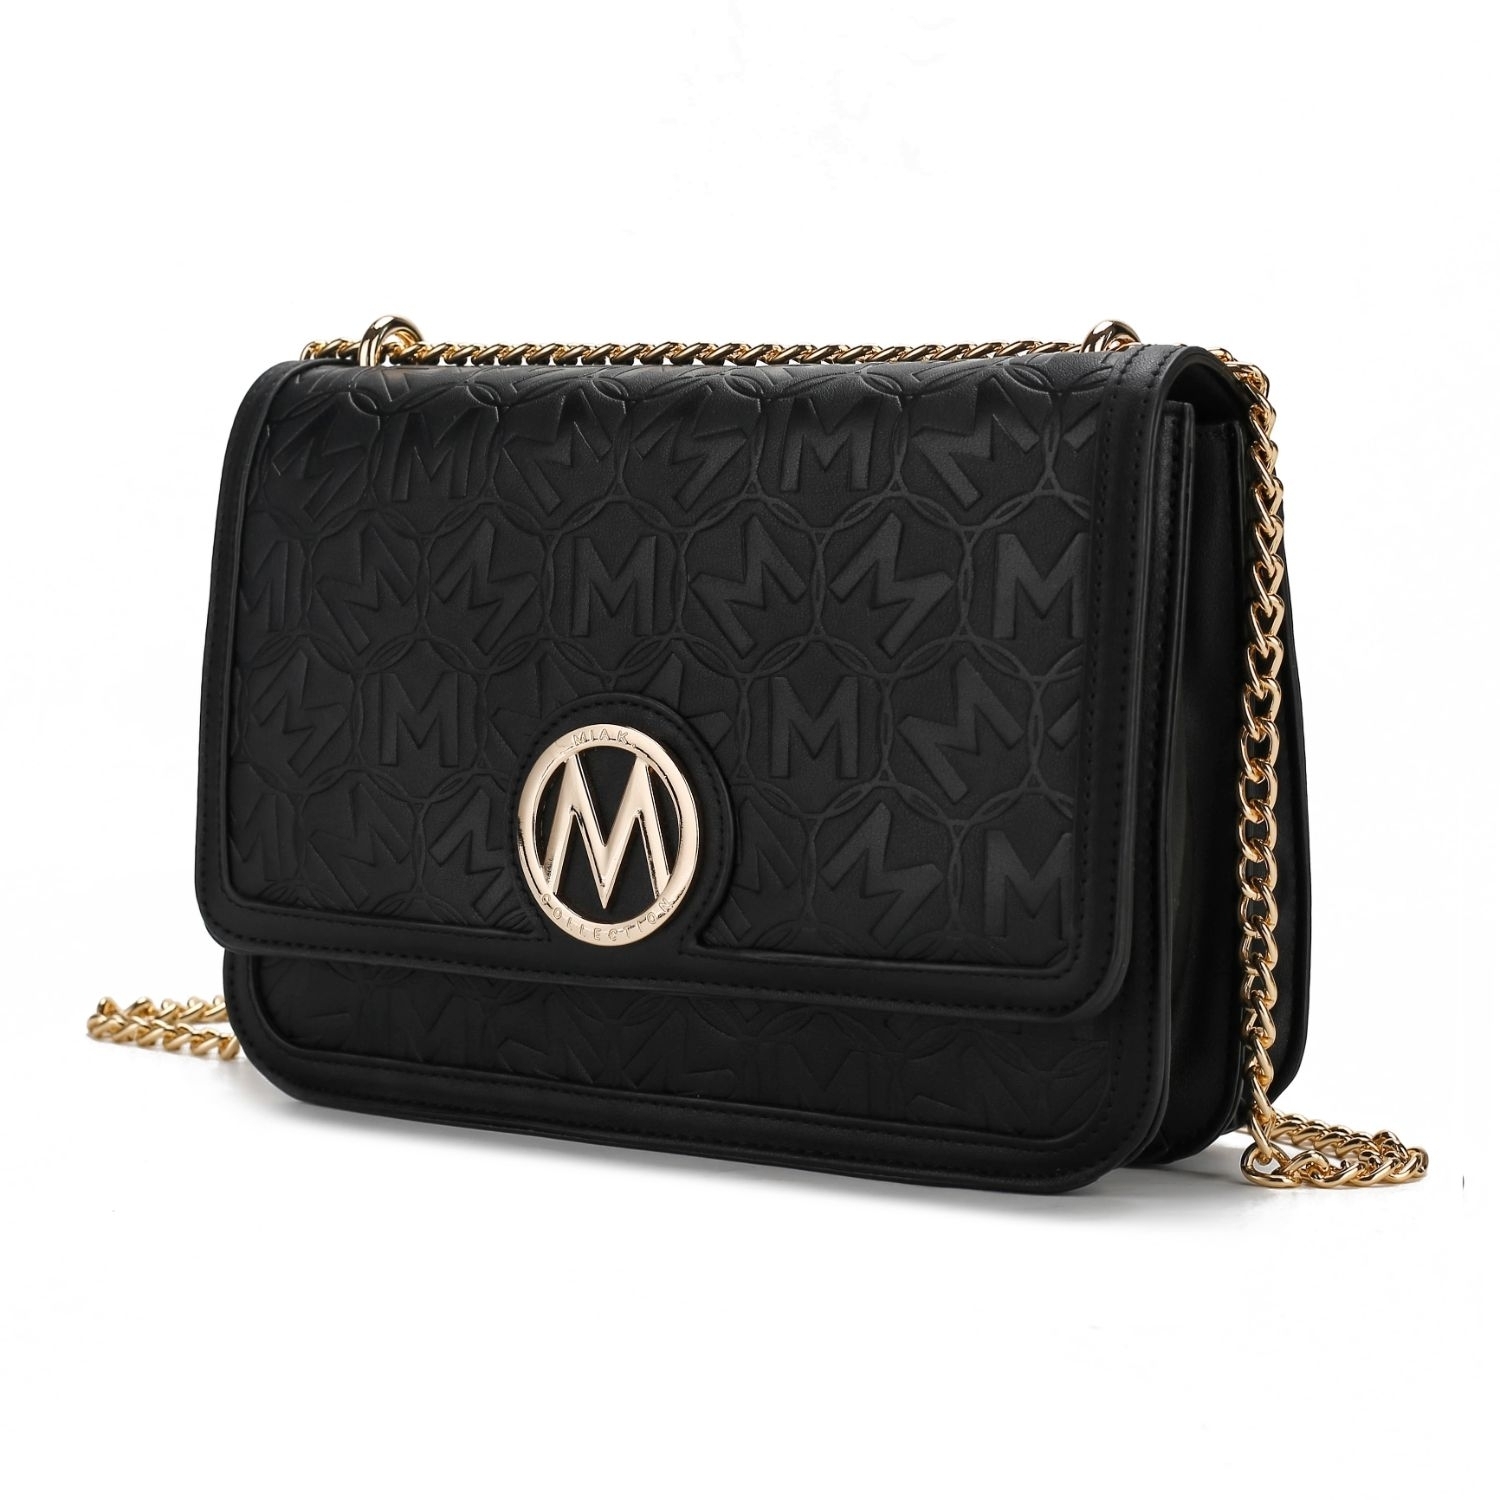 MKF Collection Amiyah Vegan Leather Women's Shoulder Bag By Mia K - Pink